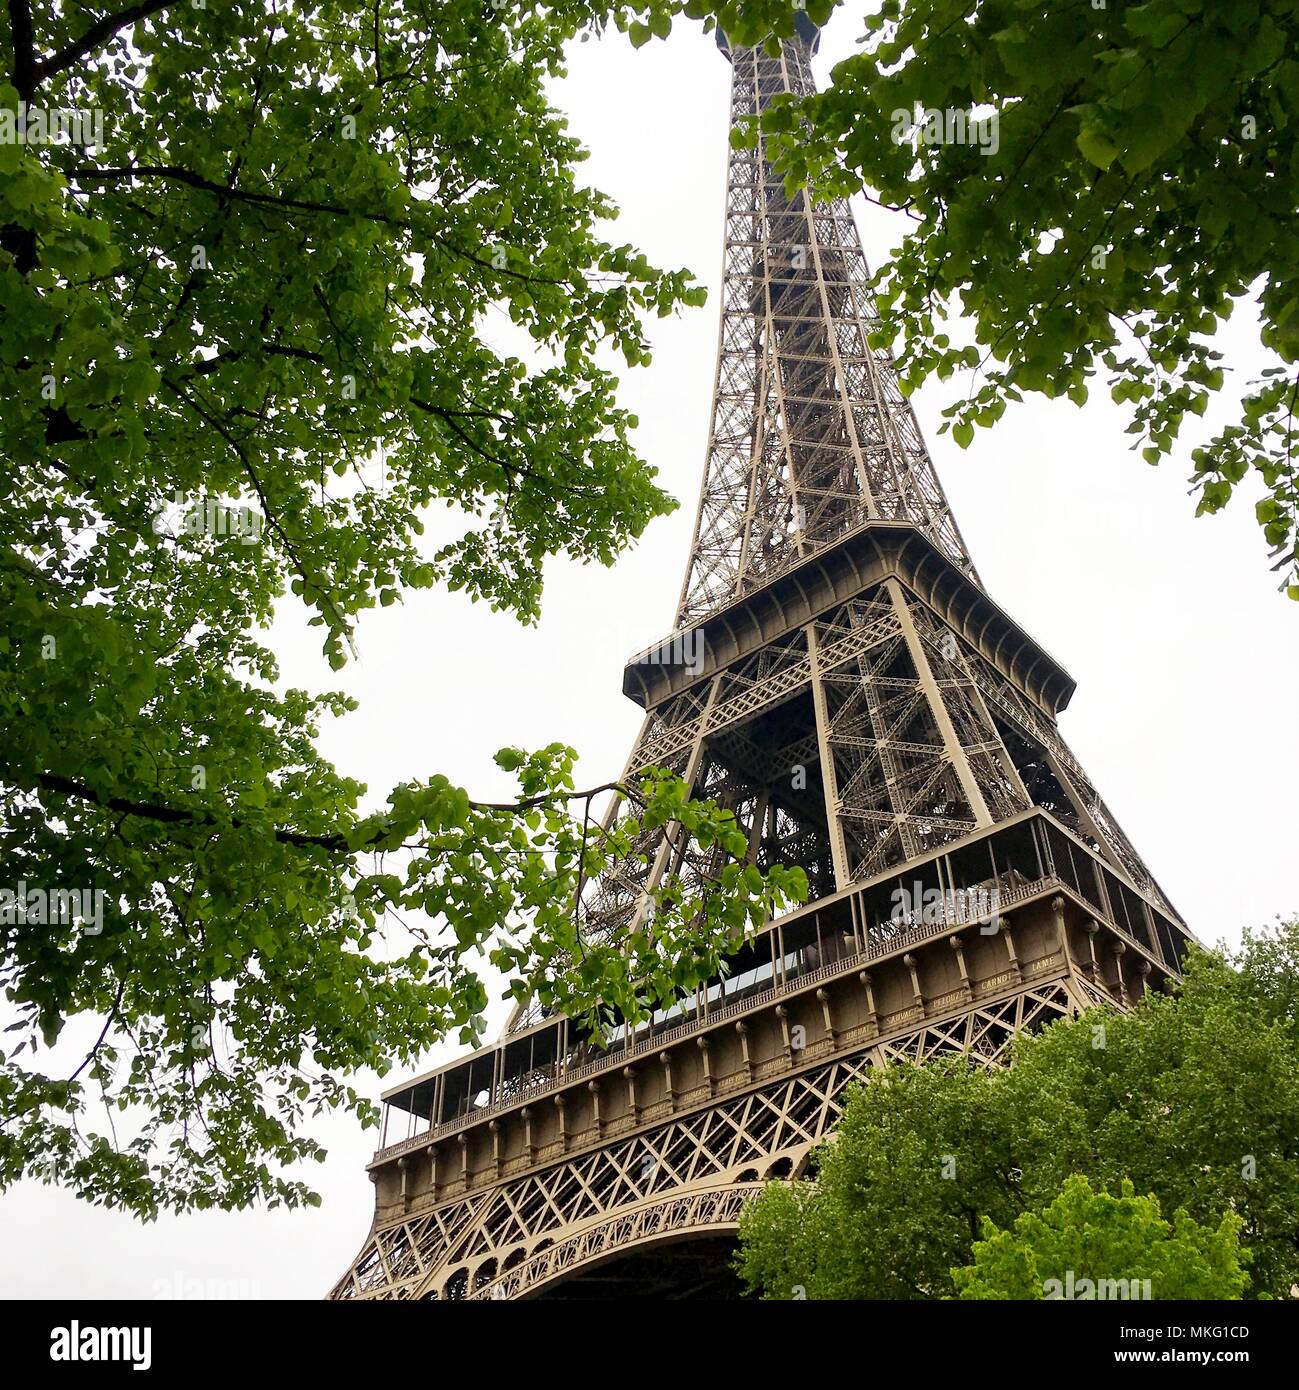 Detail of the Eiffel Tower, Paris France Stock Photo